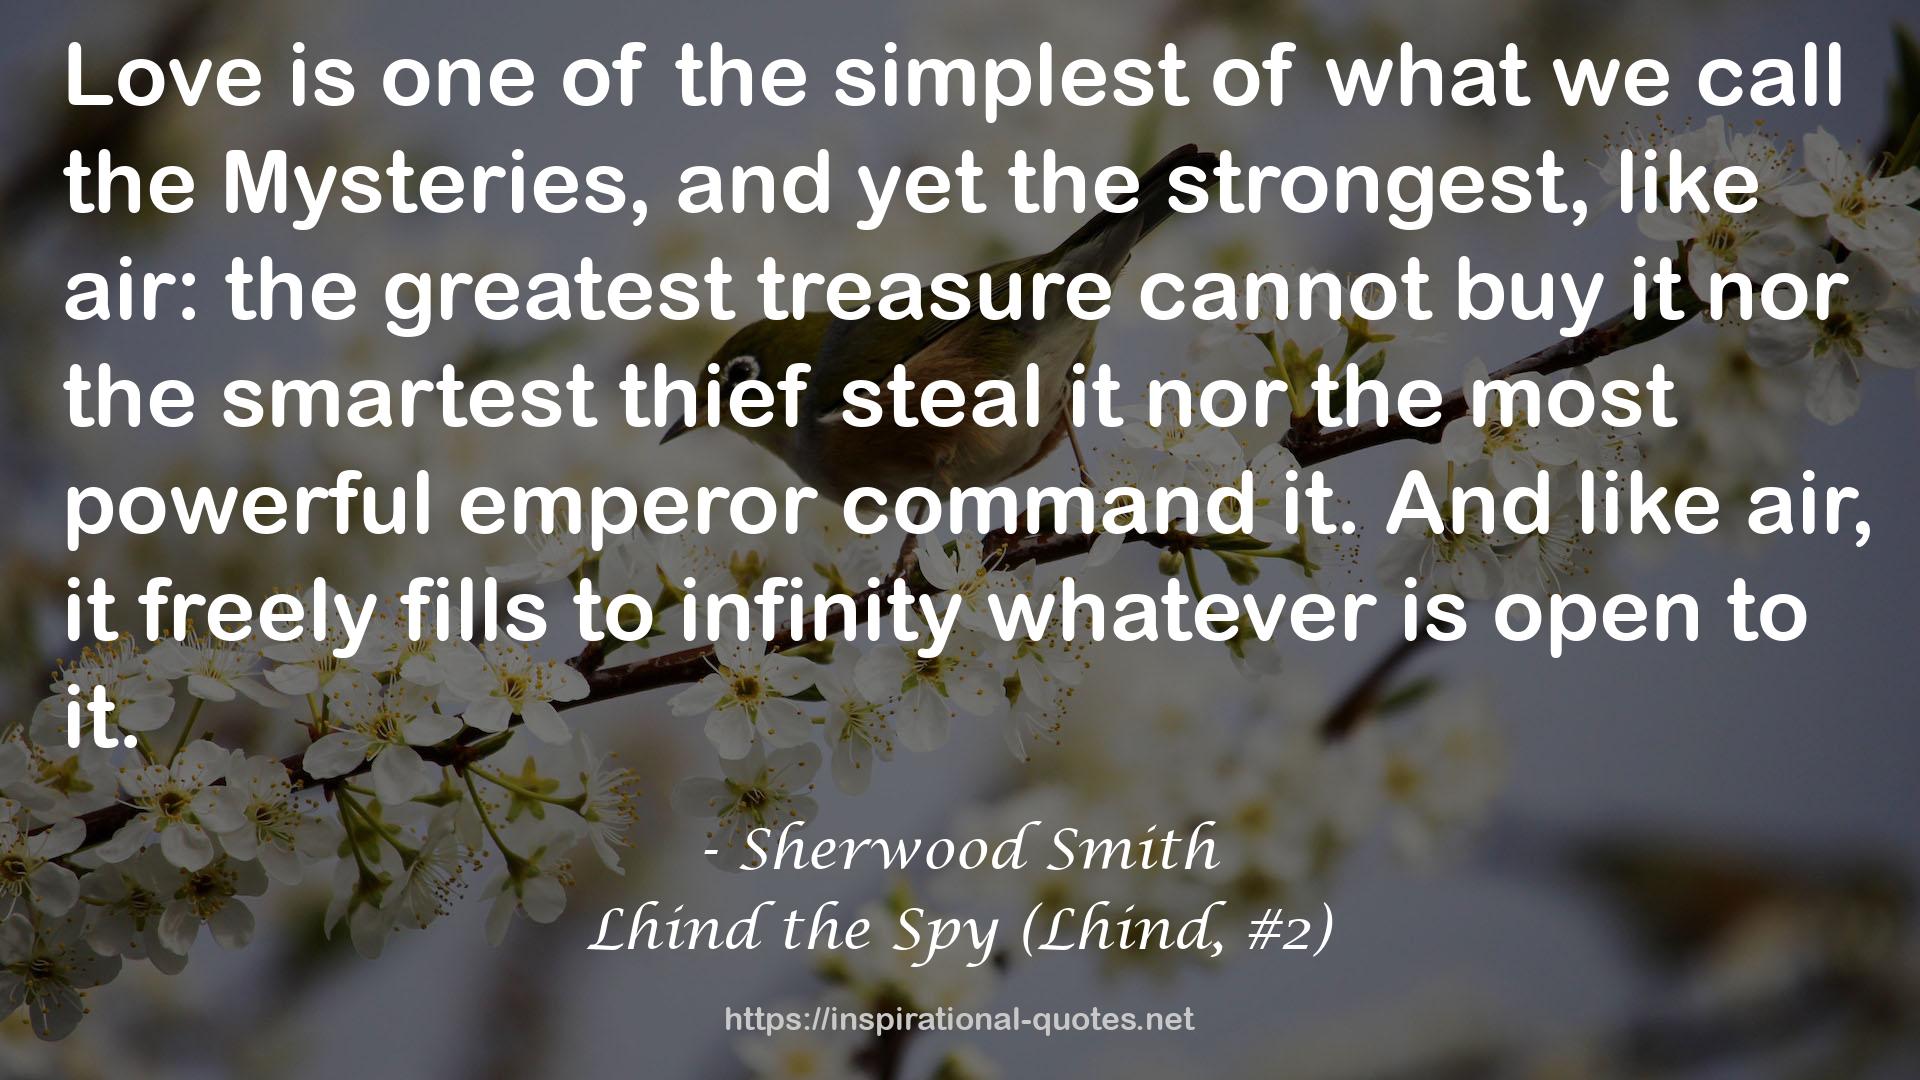 Lhind the Spy (Lhind, #2) QUOTES